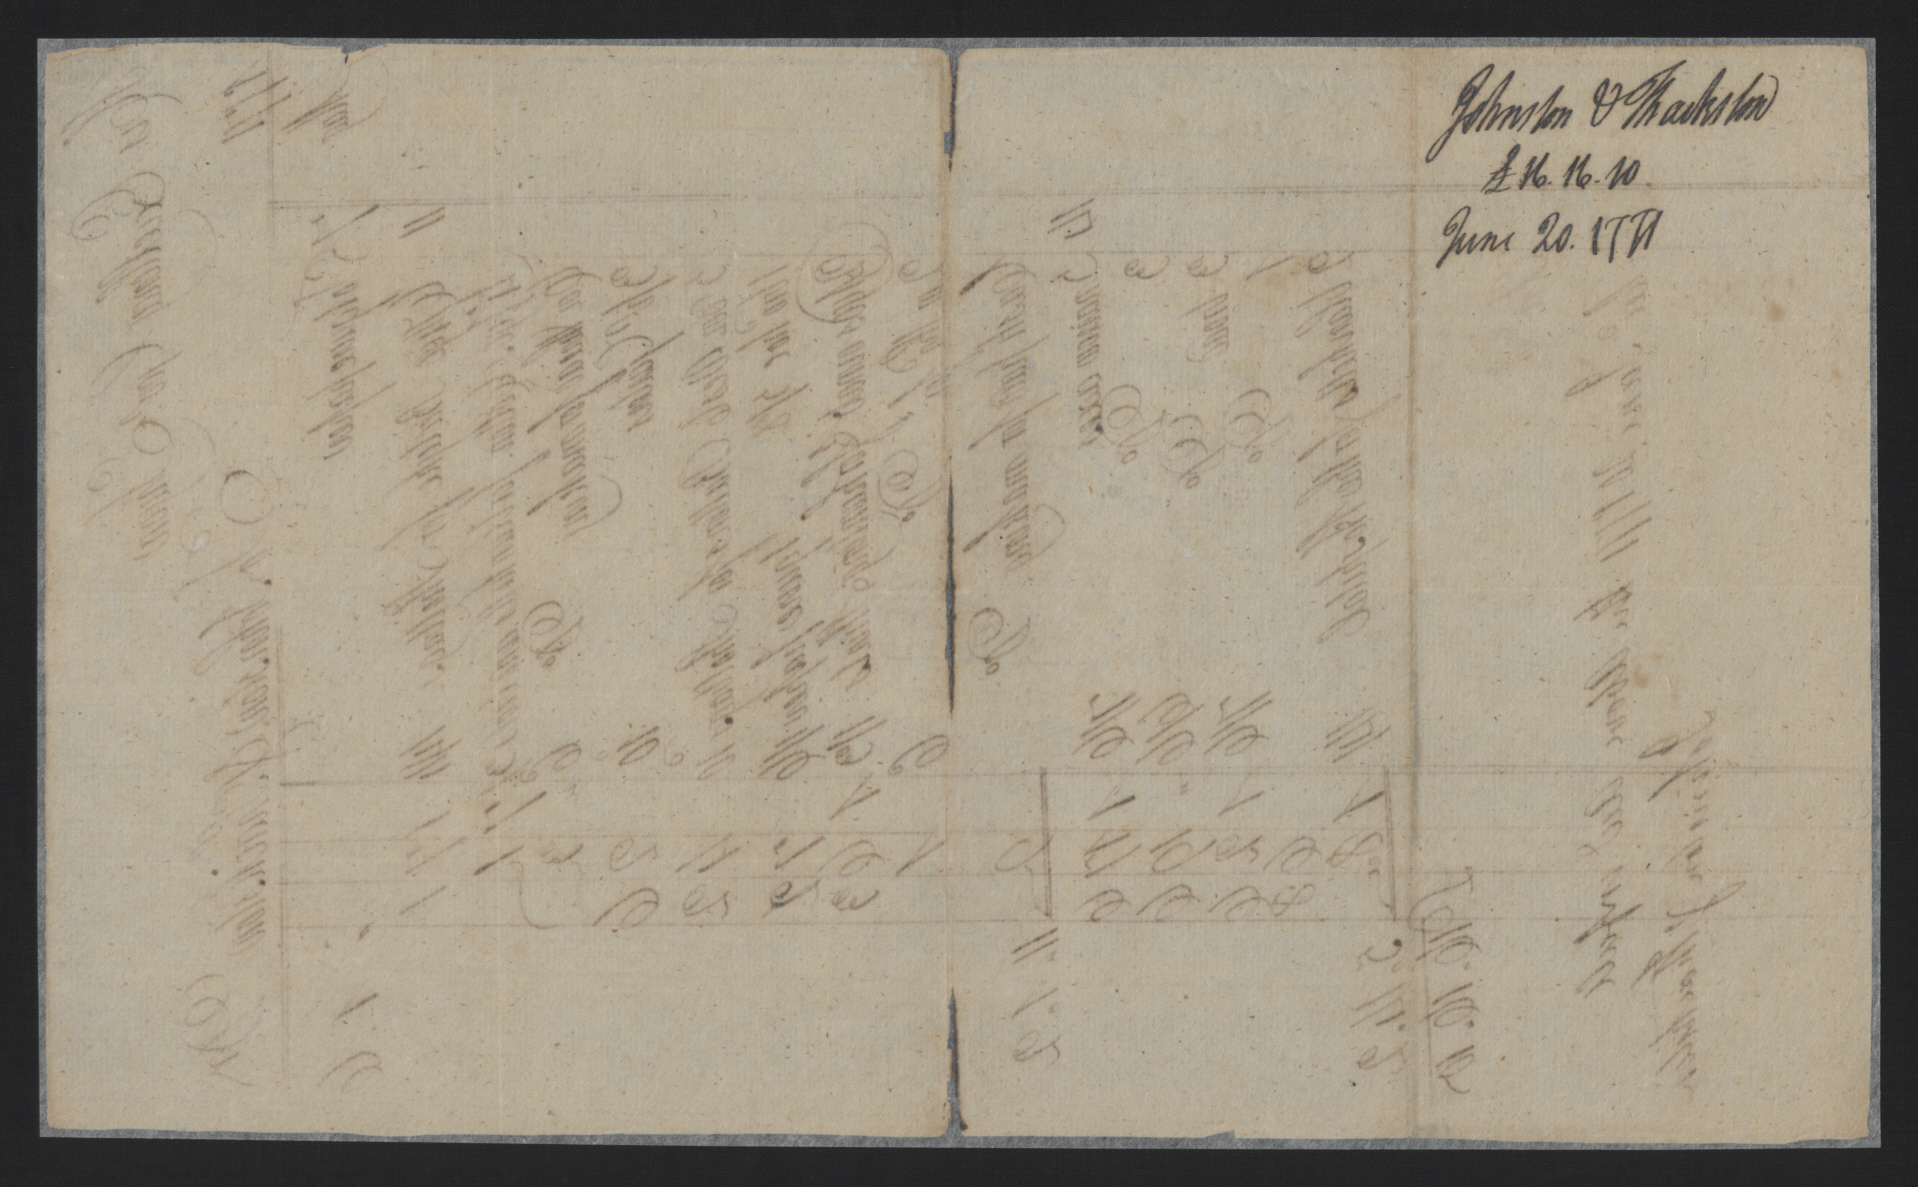 Invoice from James Thackston and William Johnston to the Militia for Supplies, June 20th 1771, page 2